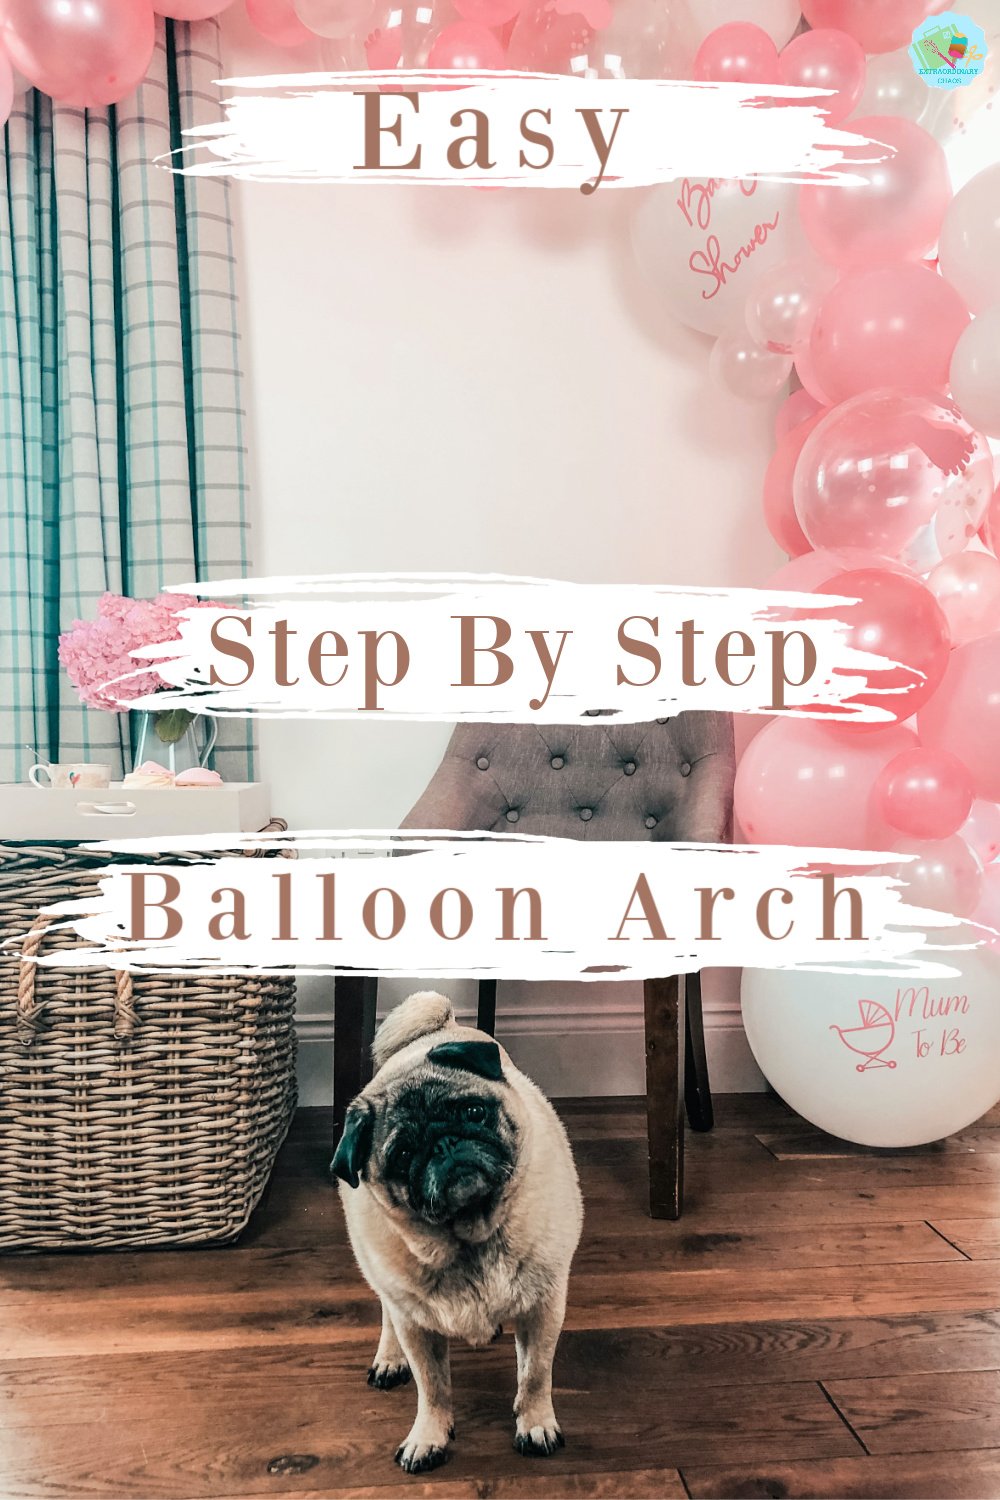 How to make an easy step by step balloon arch for parties, baby showers and bridal showers.